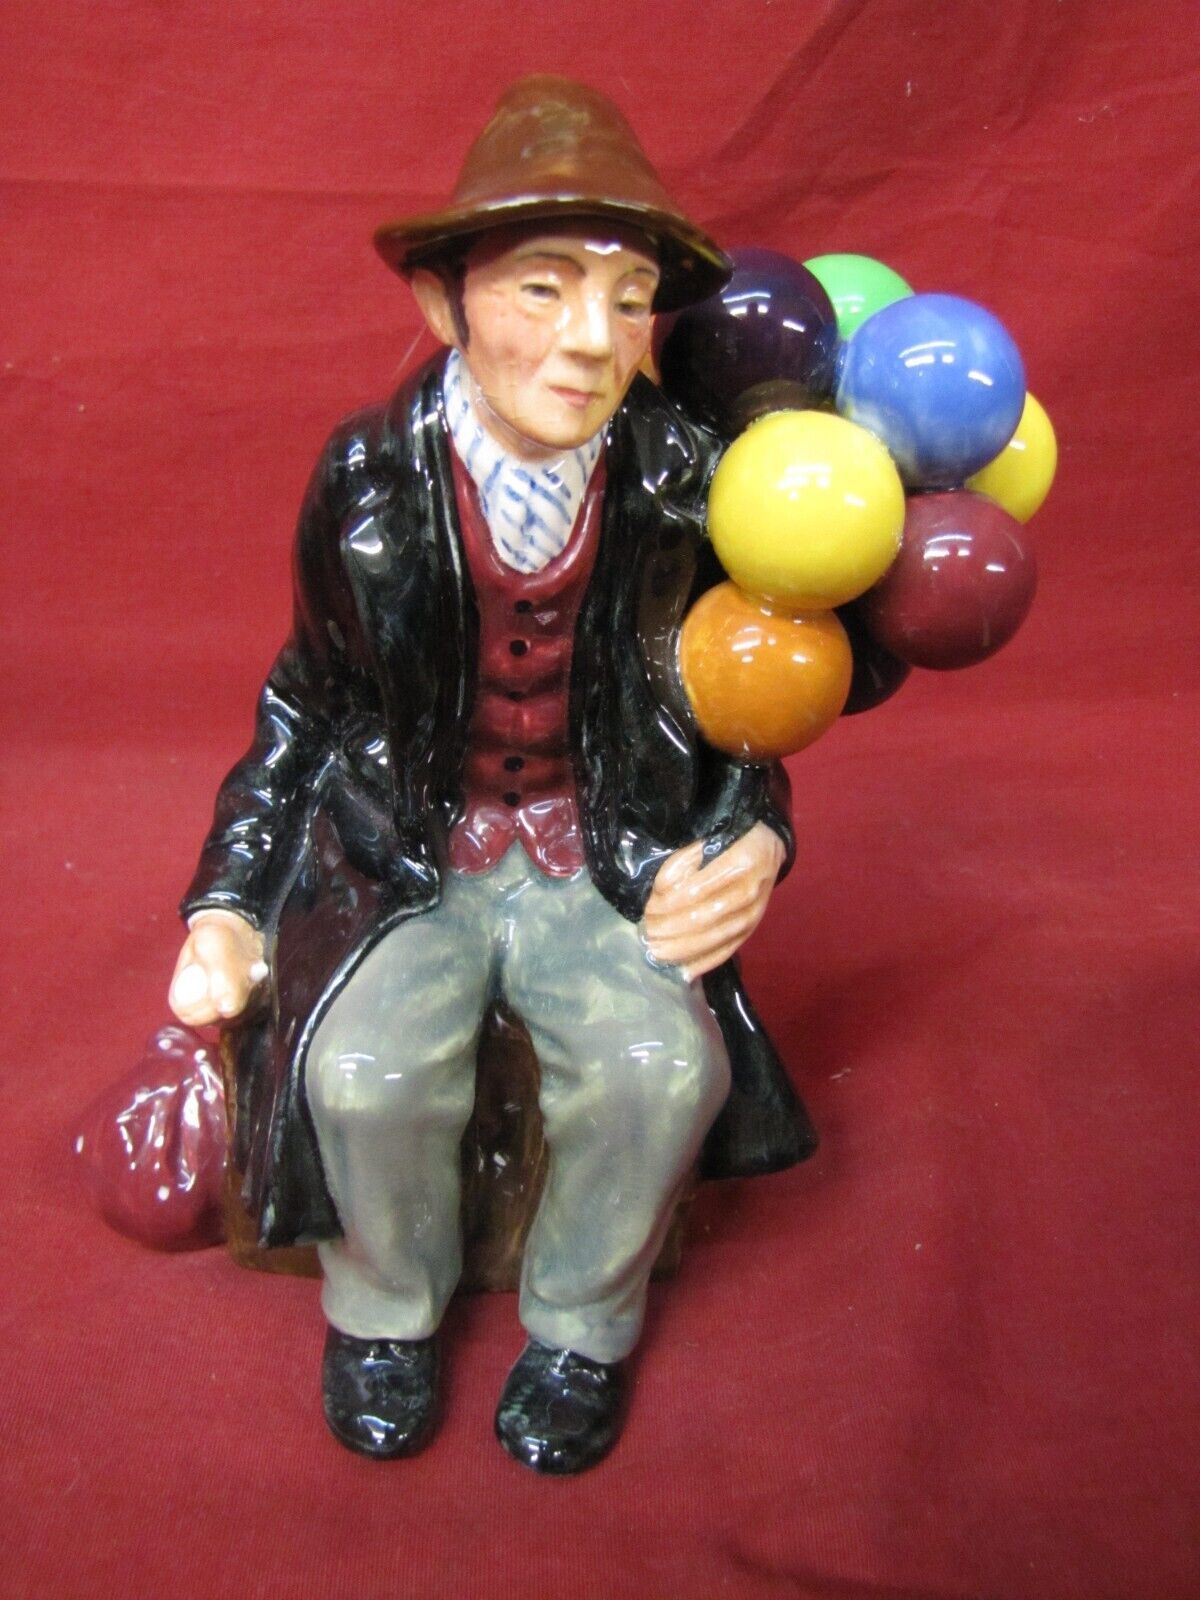 Royal Doulton "The Balloon Man" Figurine HN 1954 Made in England Excellent Cond. - $49.49